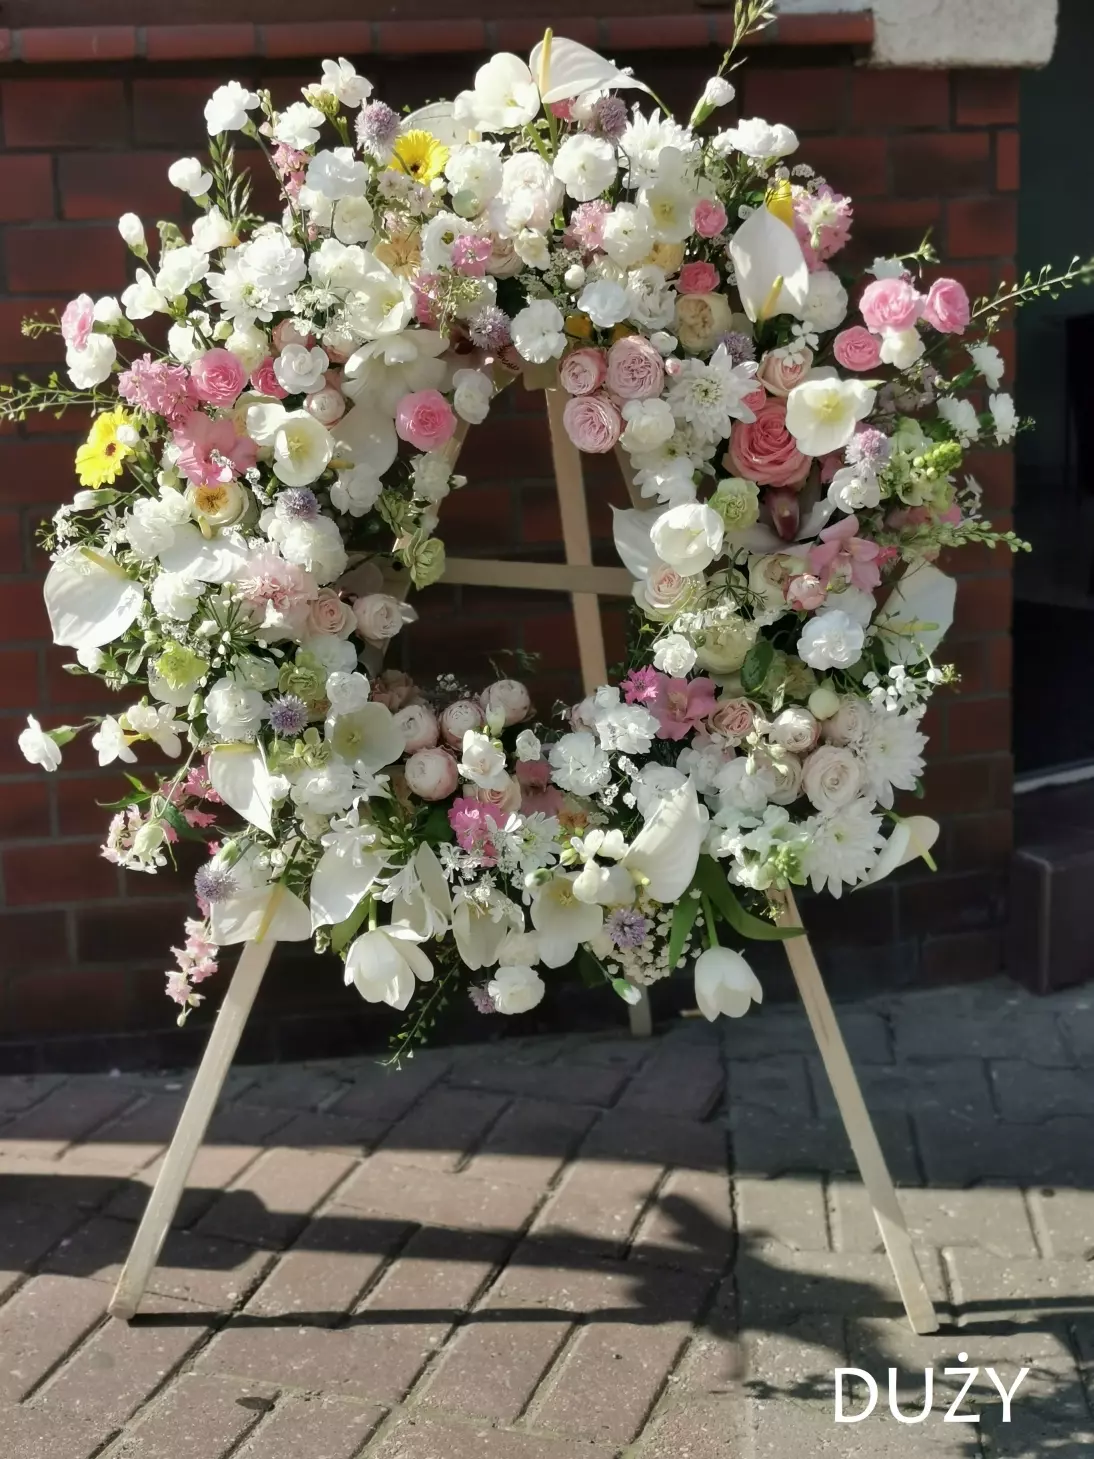 The wreath consists of harmoniously selected species of flowers, subdued colours, including: English roses, twig and full roses, anthurium flowers, gerberas, carnations, ferns, tulips, agapanthus, garlands, eustoma.